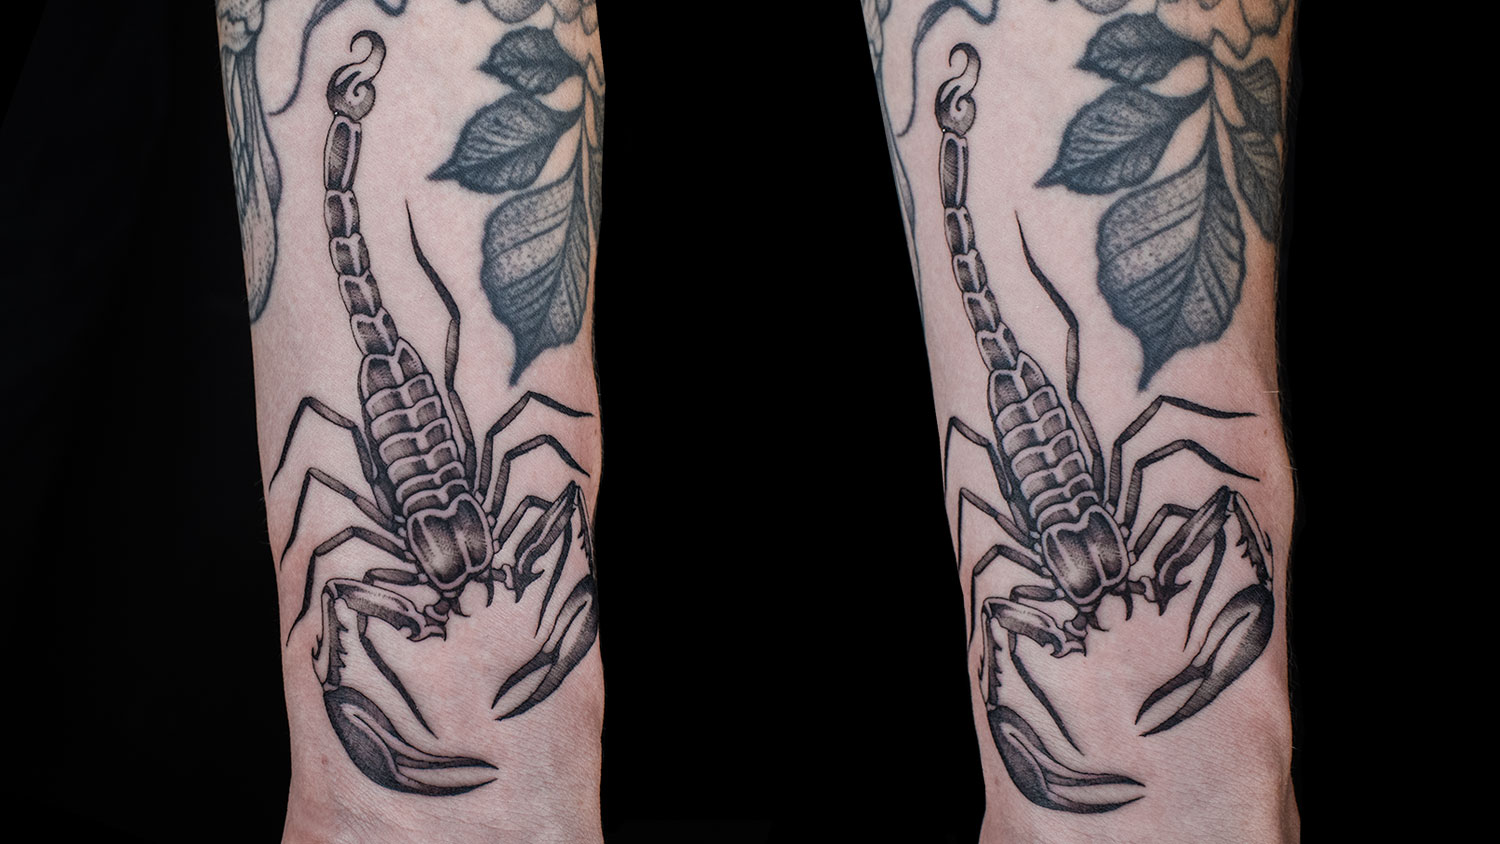 4. Black and Grey Scorpion Sleeve Tattoos - wide 3